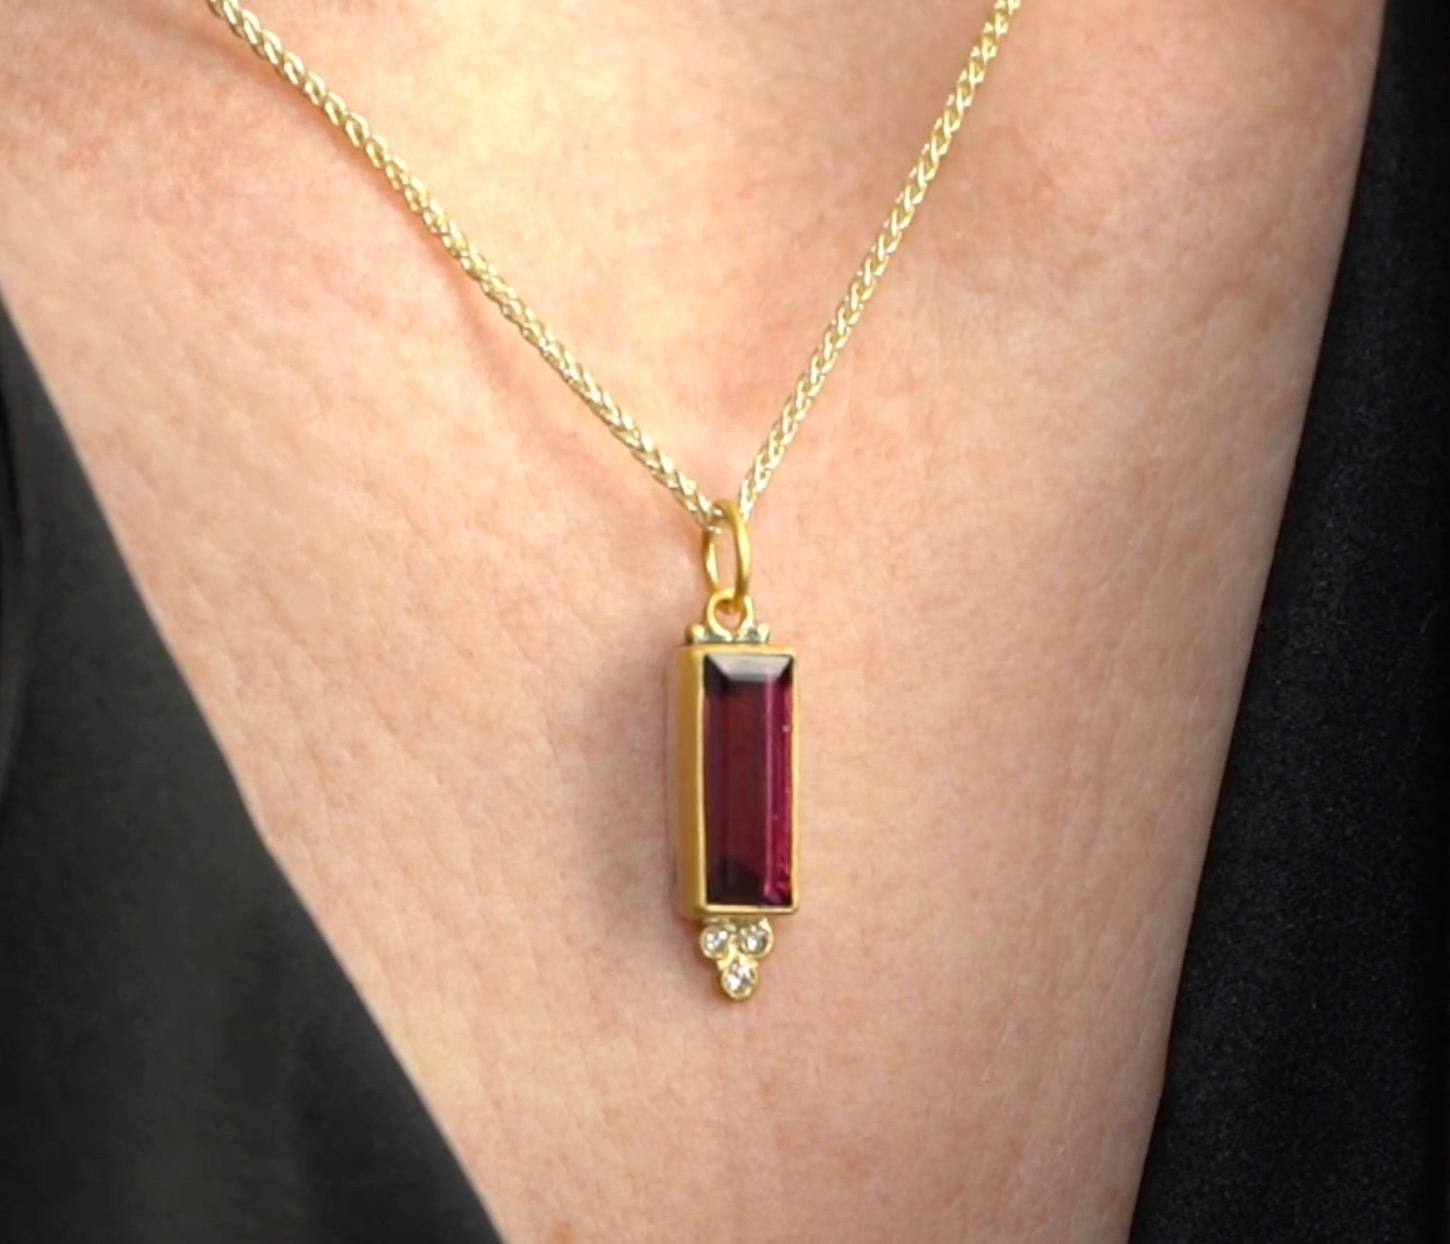 Rectangular Tourmaline Charm Pendant Necklace with Diamonds, 24kt Gold and Silver by Prehistoric Works of Istanbul, Turkey. Tourmaline - 5.10 cts, Diamonds - 0.06cts. Measures 7mm x 24mm, comes with 16